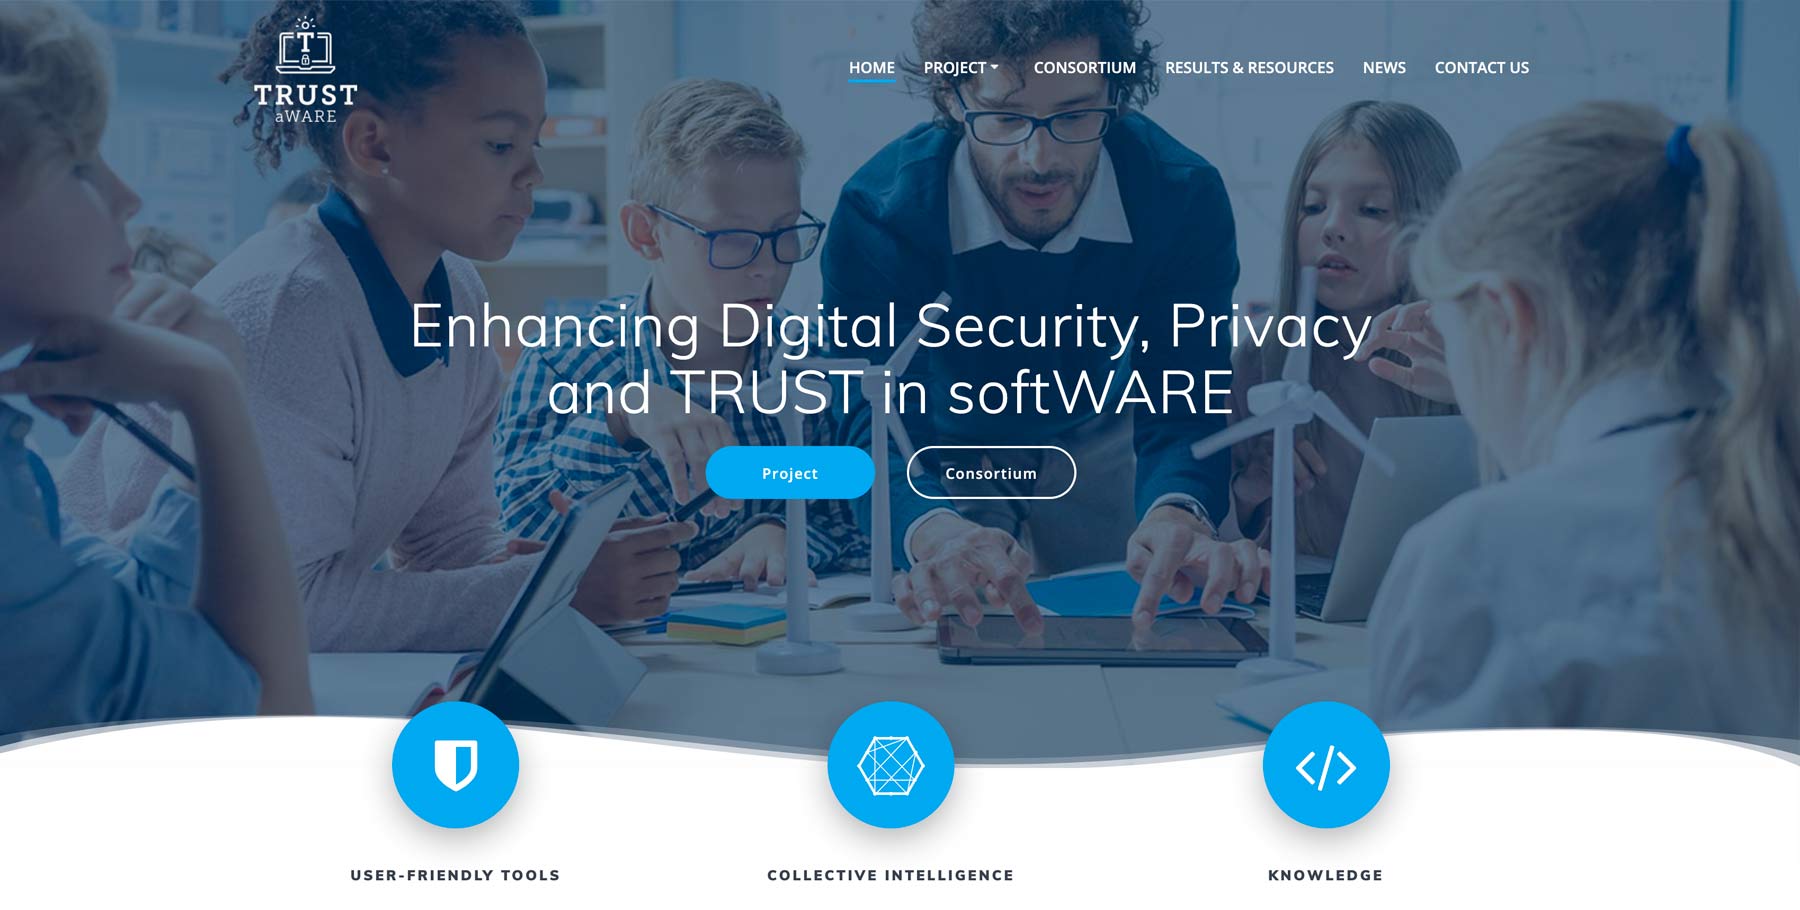 Do you want to get involved in the co-creation of tools to respond to security and privacy threats? Follow the TRUST aWARE proje